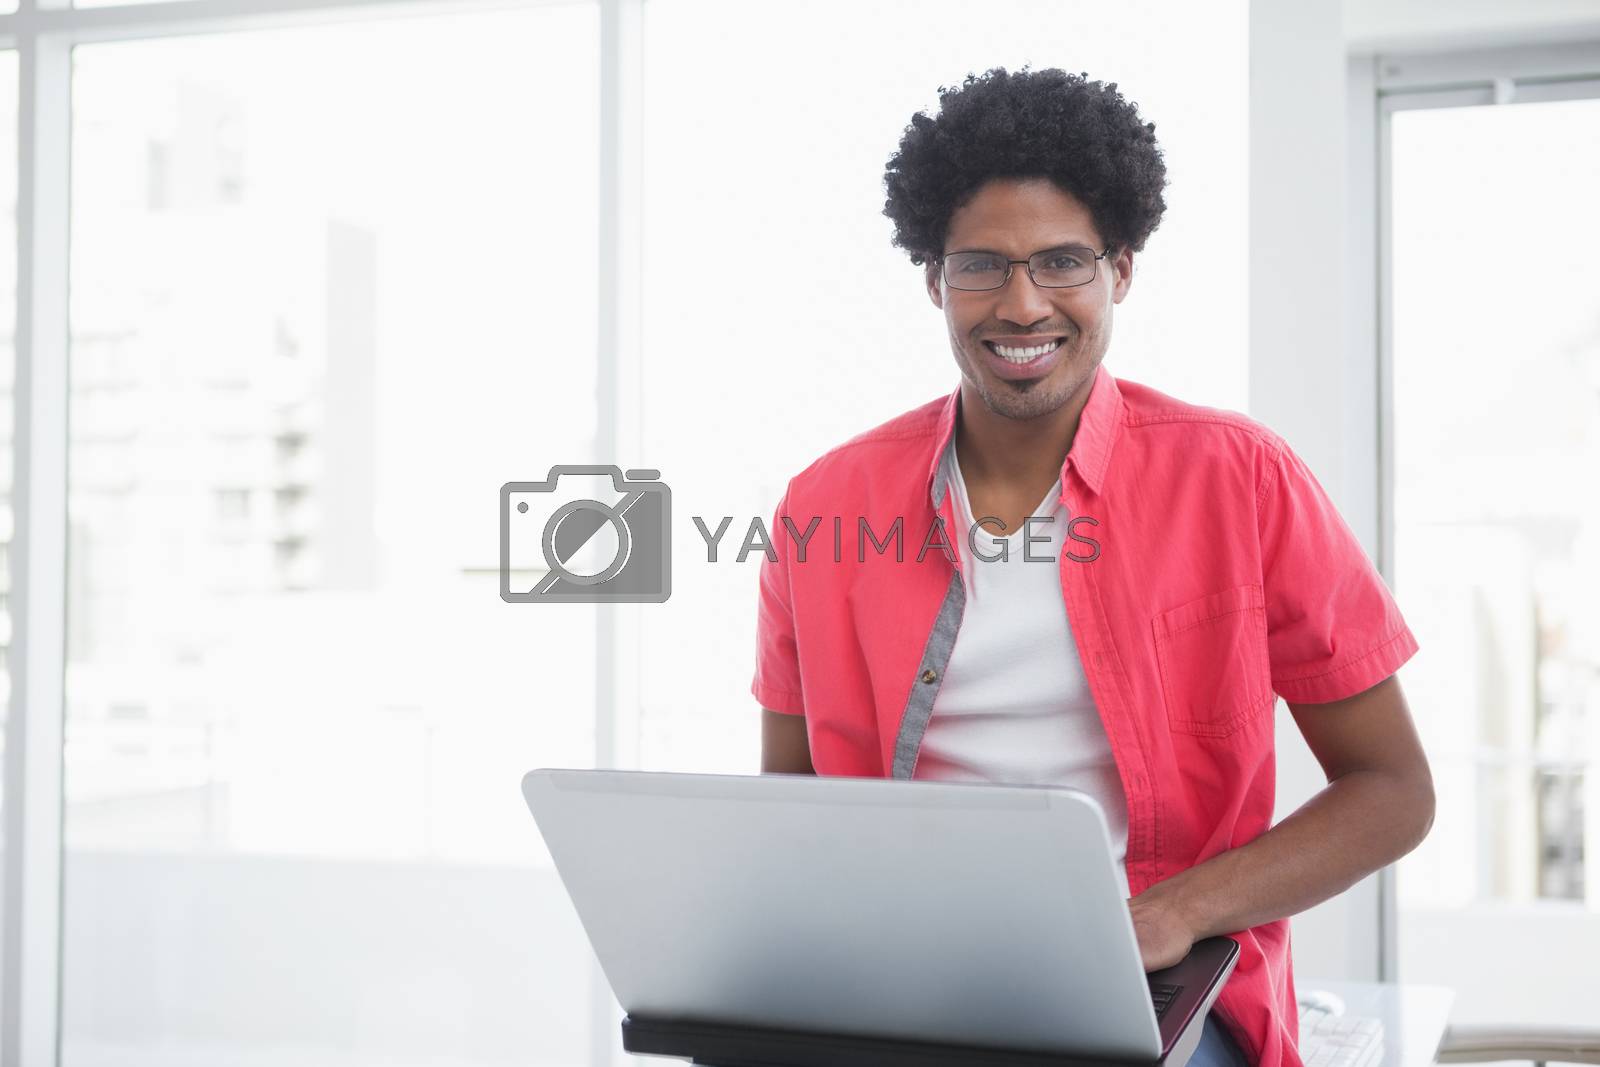 Royalty free image of Casual businessman smiling and using laptop by Wavebreakmedia